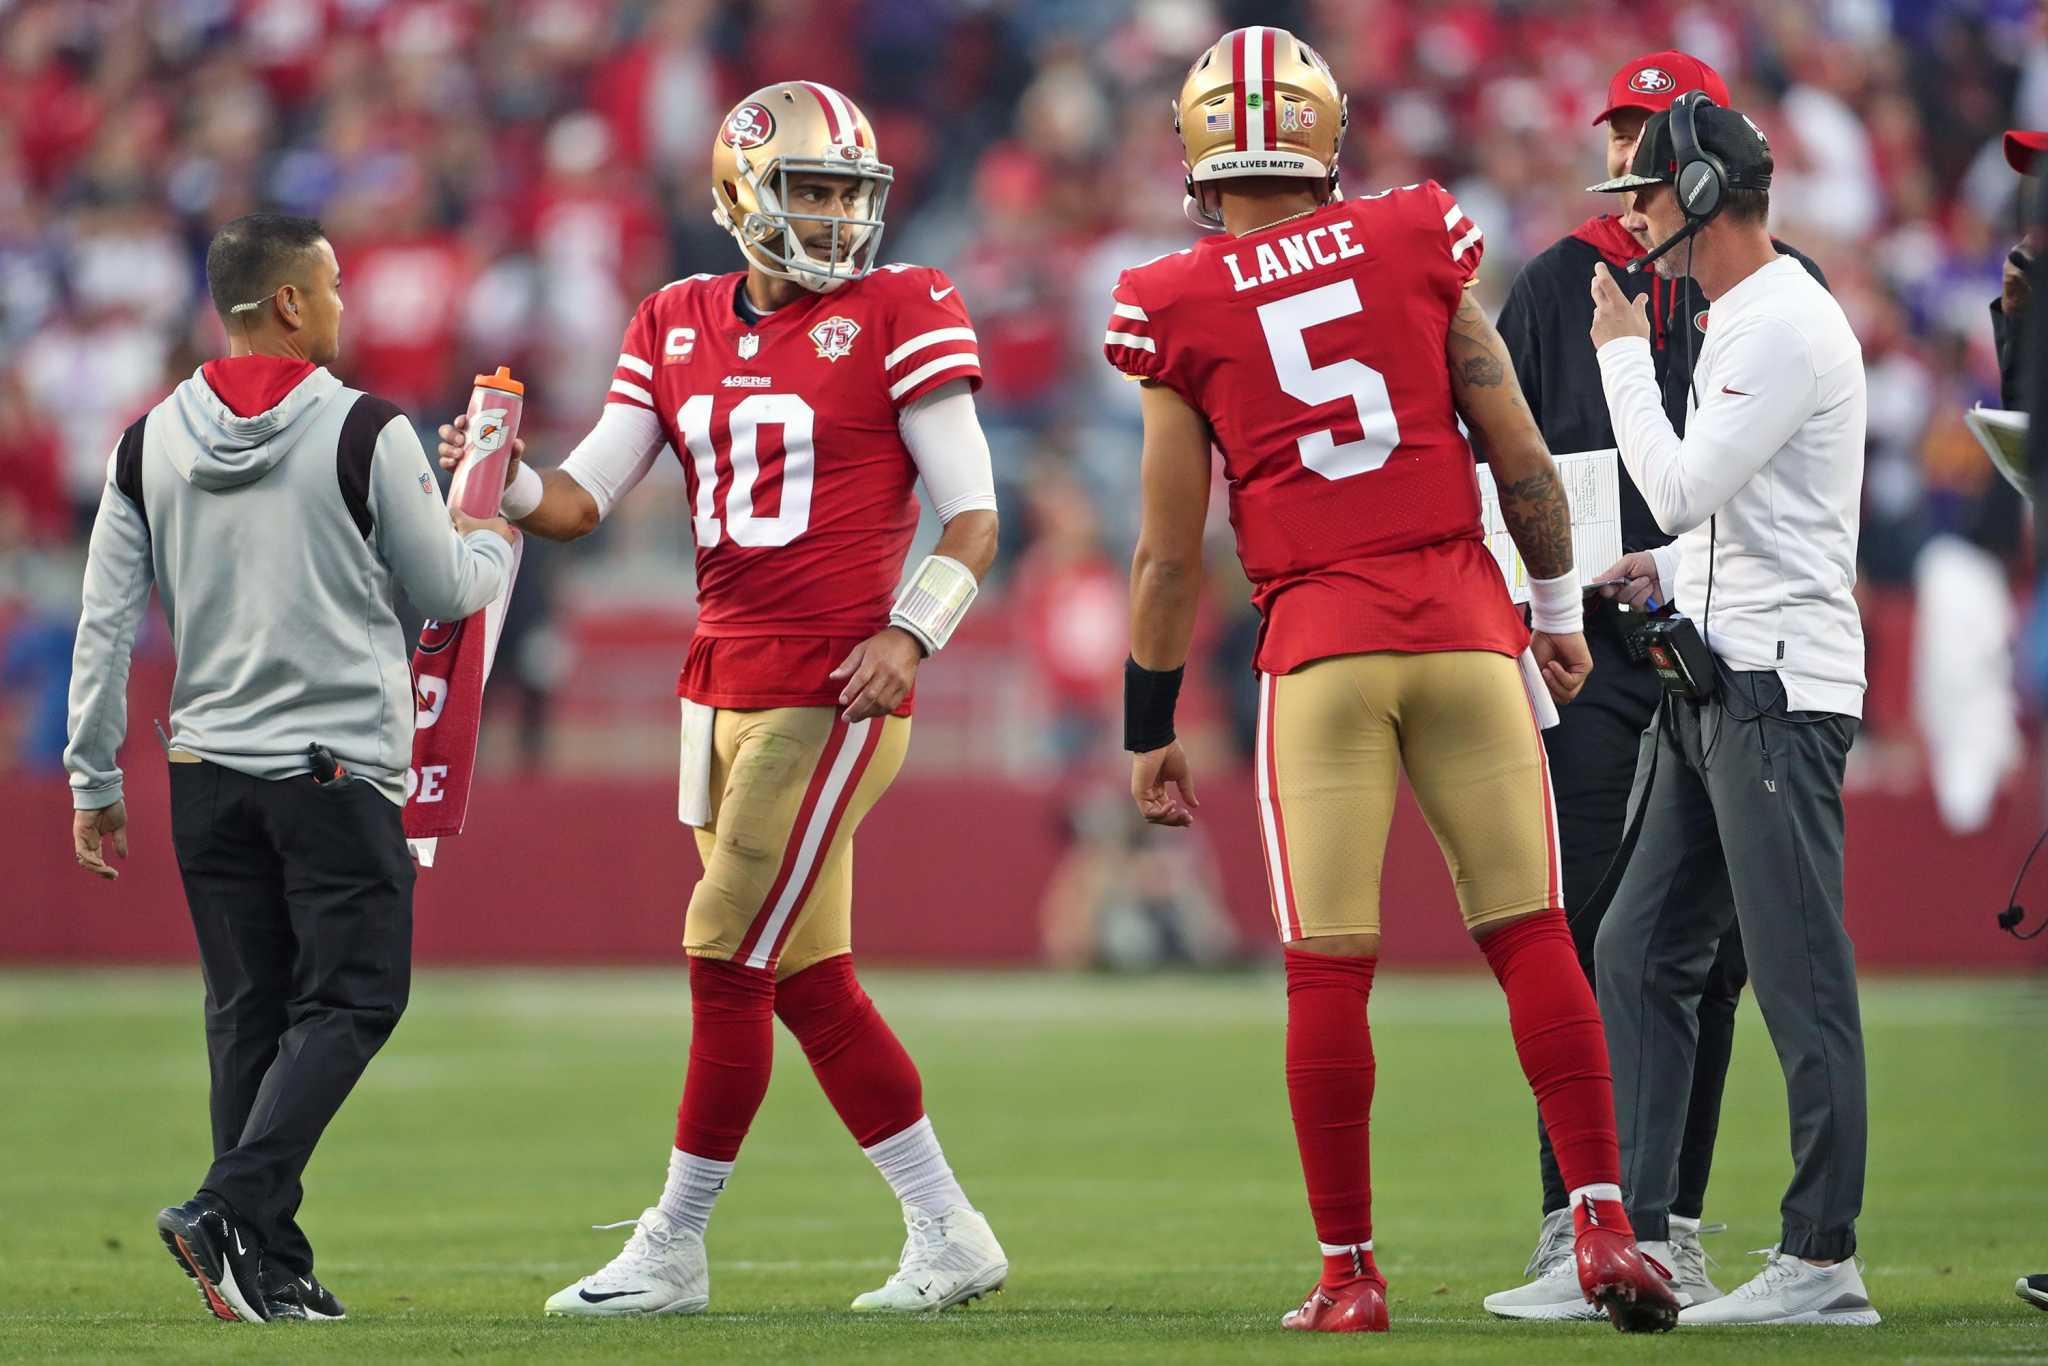 Trey Lance or Jimmy Garoppolo? Here's who evidence suggests 49ers